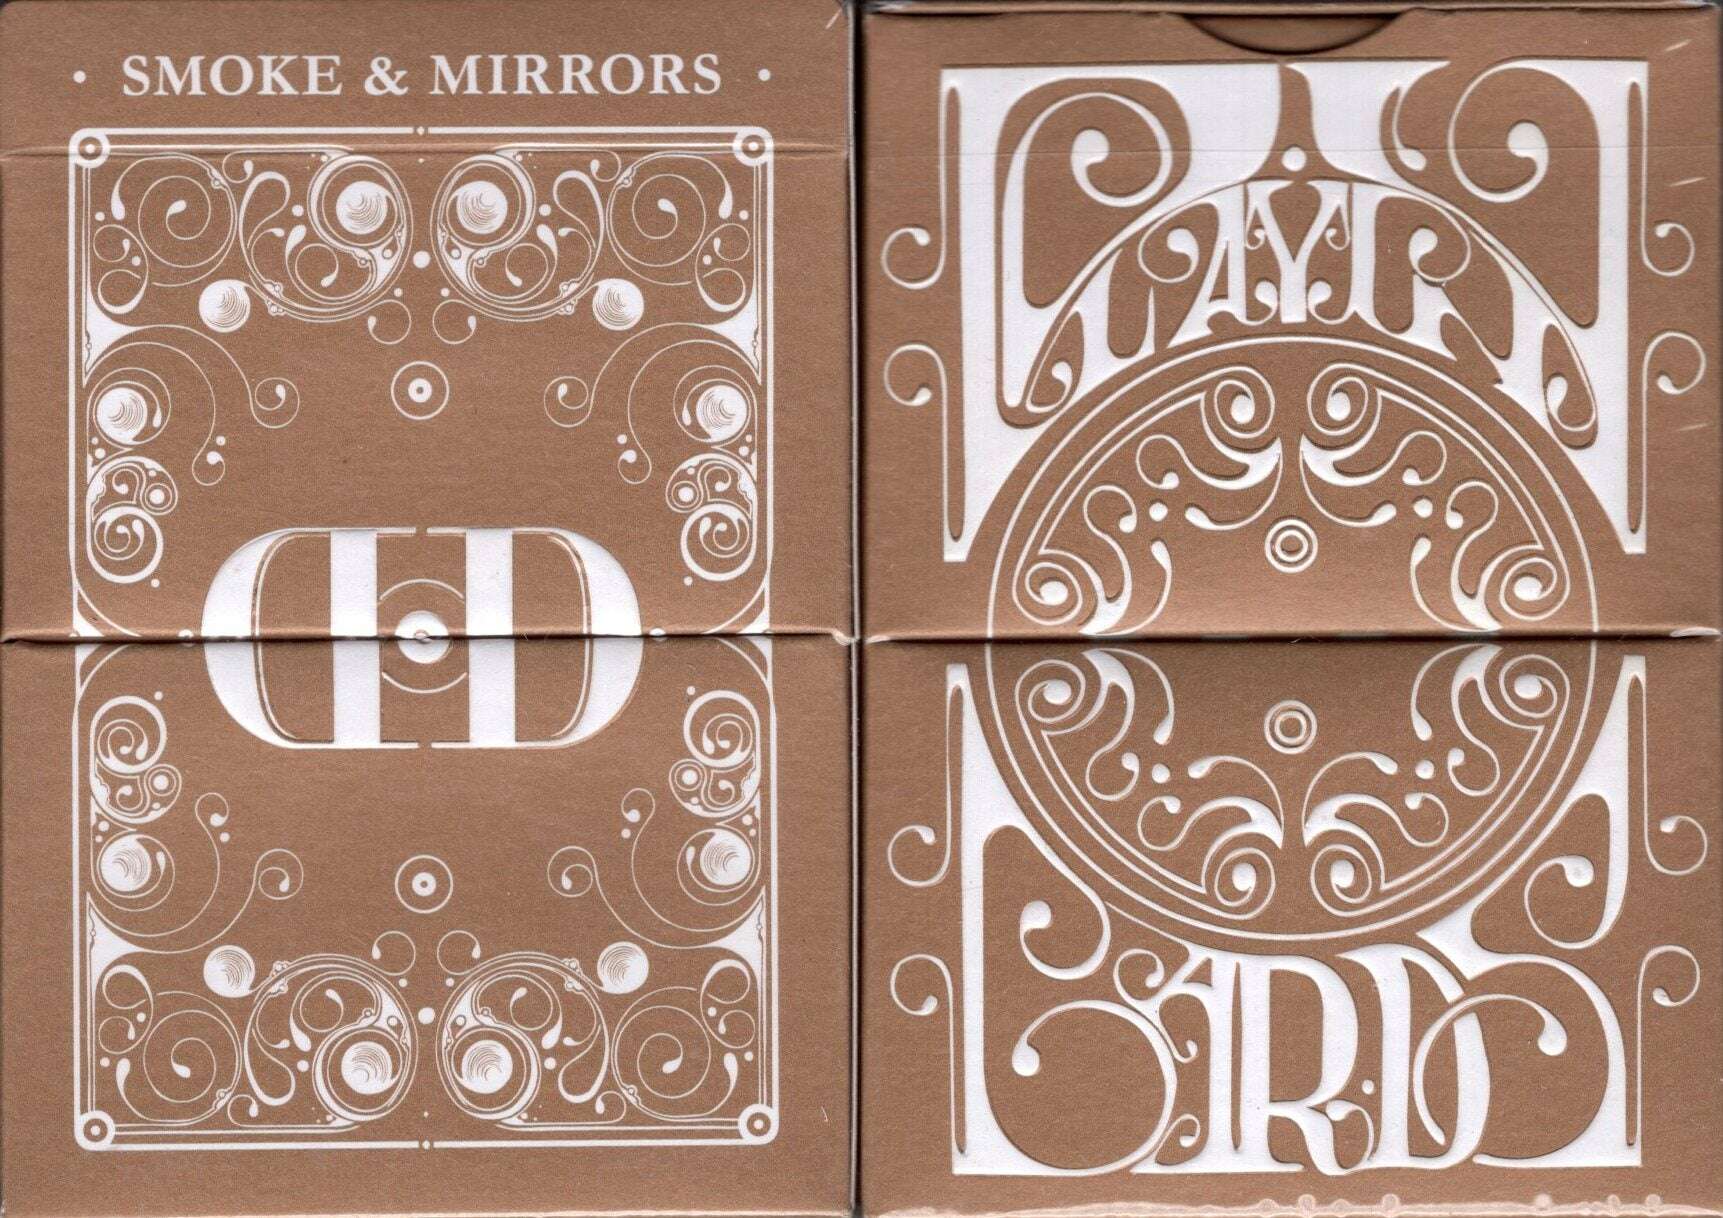 PlayingCardDecks.com-Smoke & Mirrors v8 Gold Deluxe Playing Cards USPCC